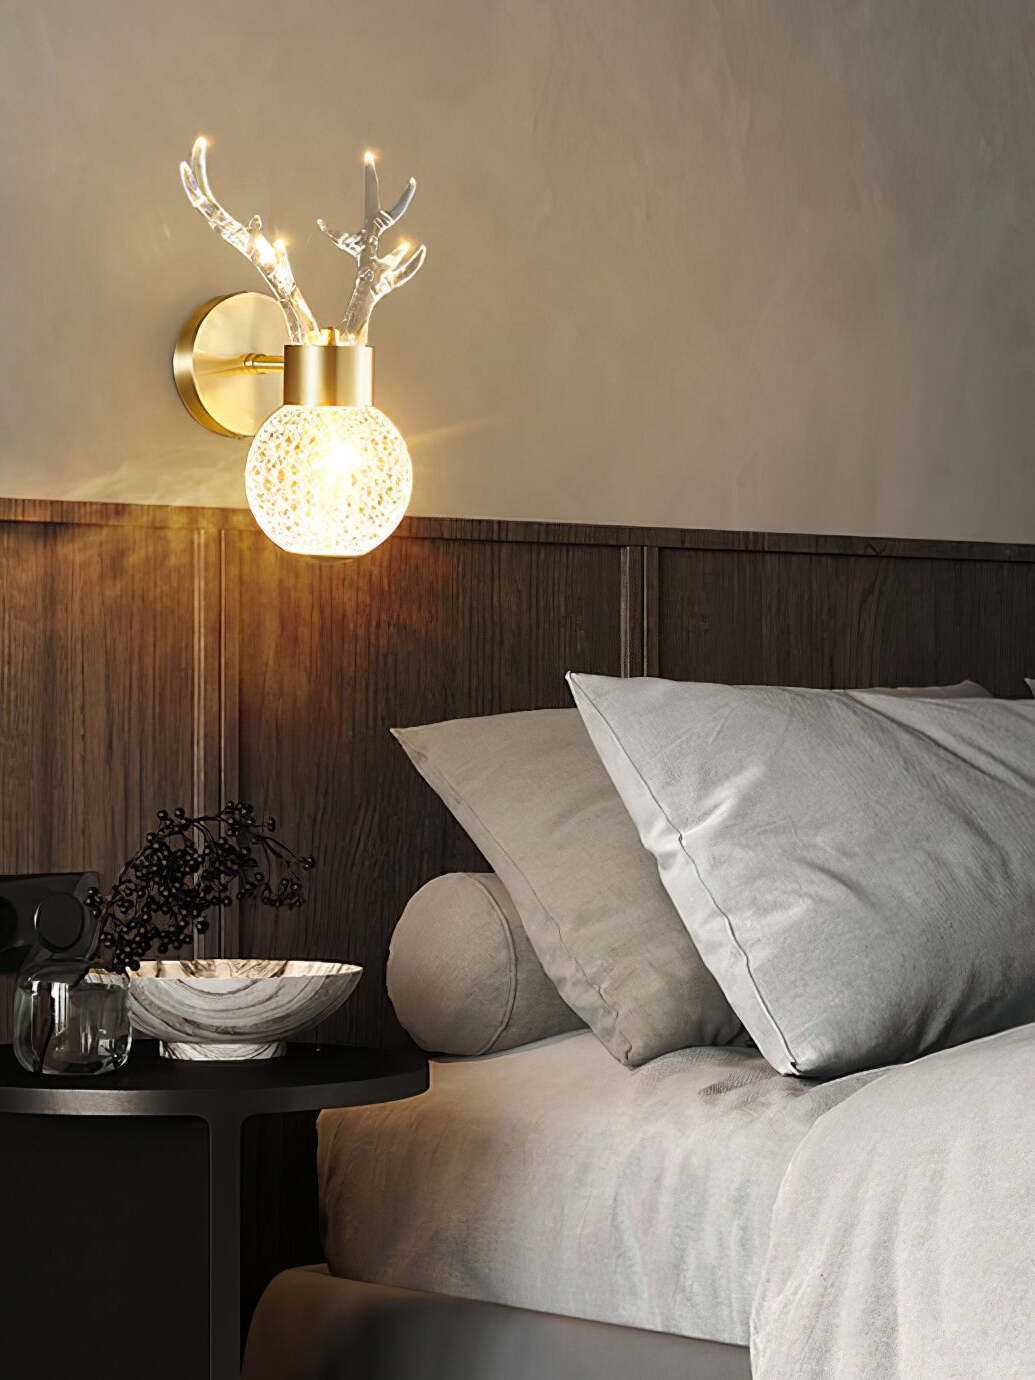 Enhance Your Bedroom Decor with Stylish
Wall Mounted Lights